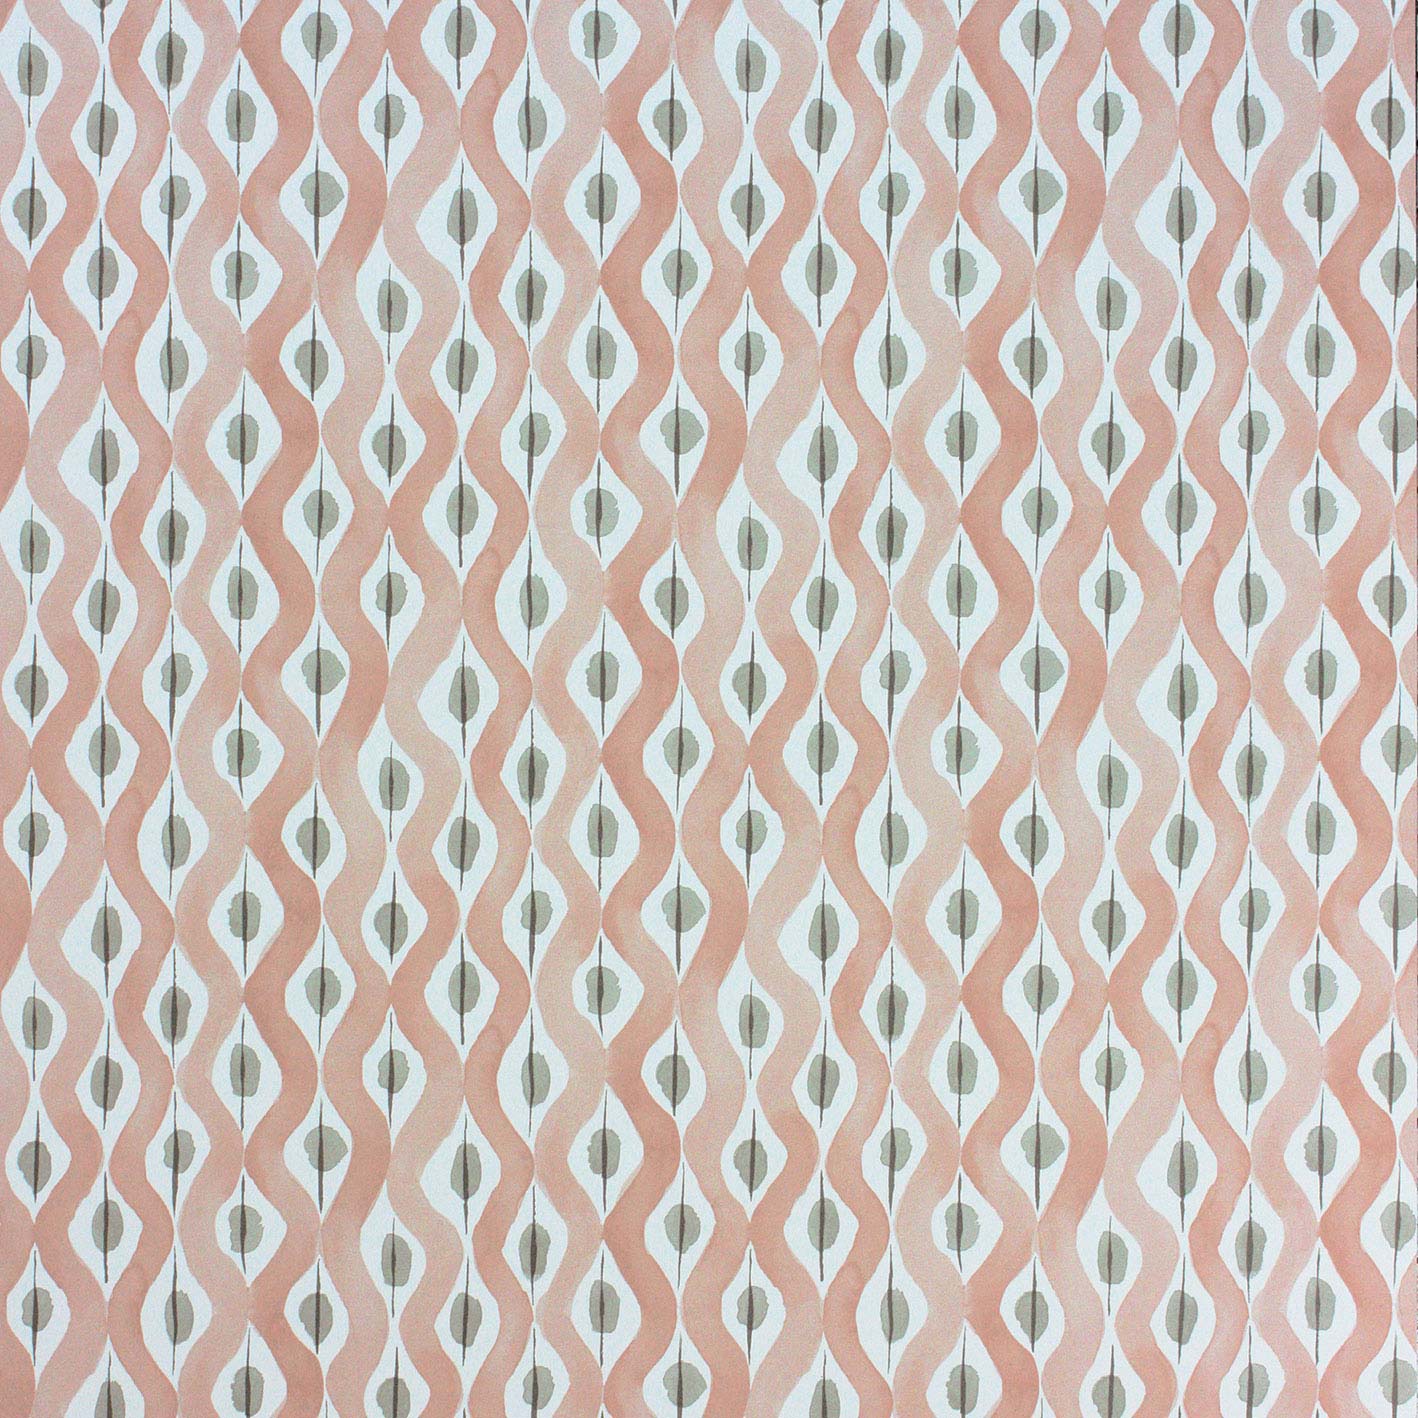 Les Rêves Beau Rivage Pink/Taupe - NCW4301-02